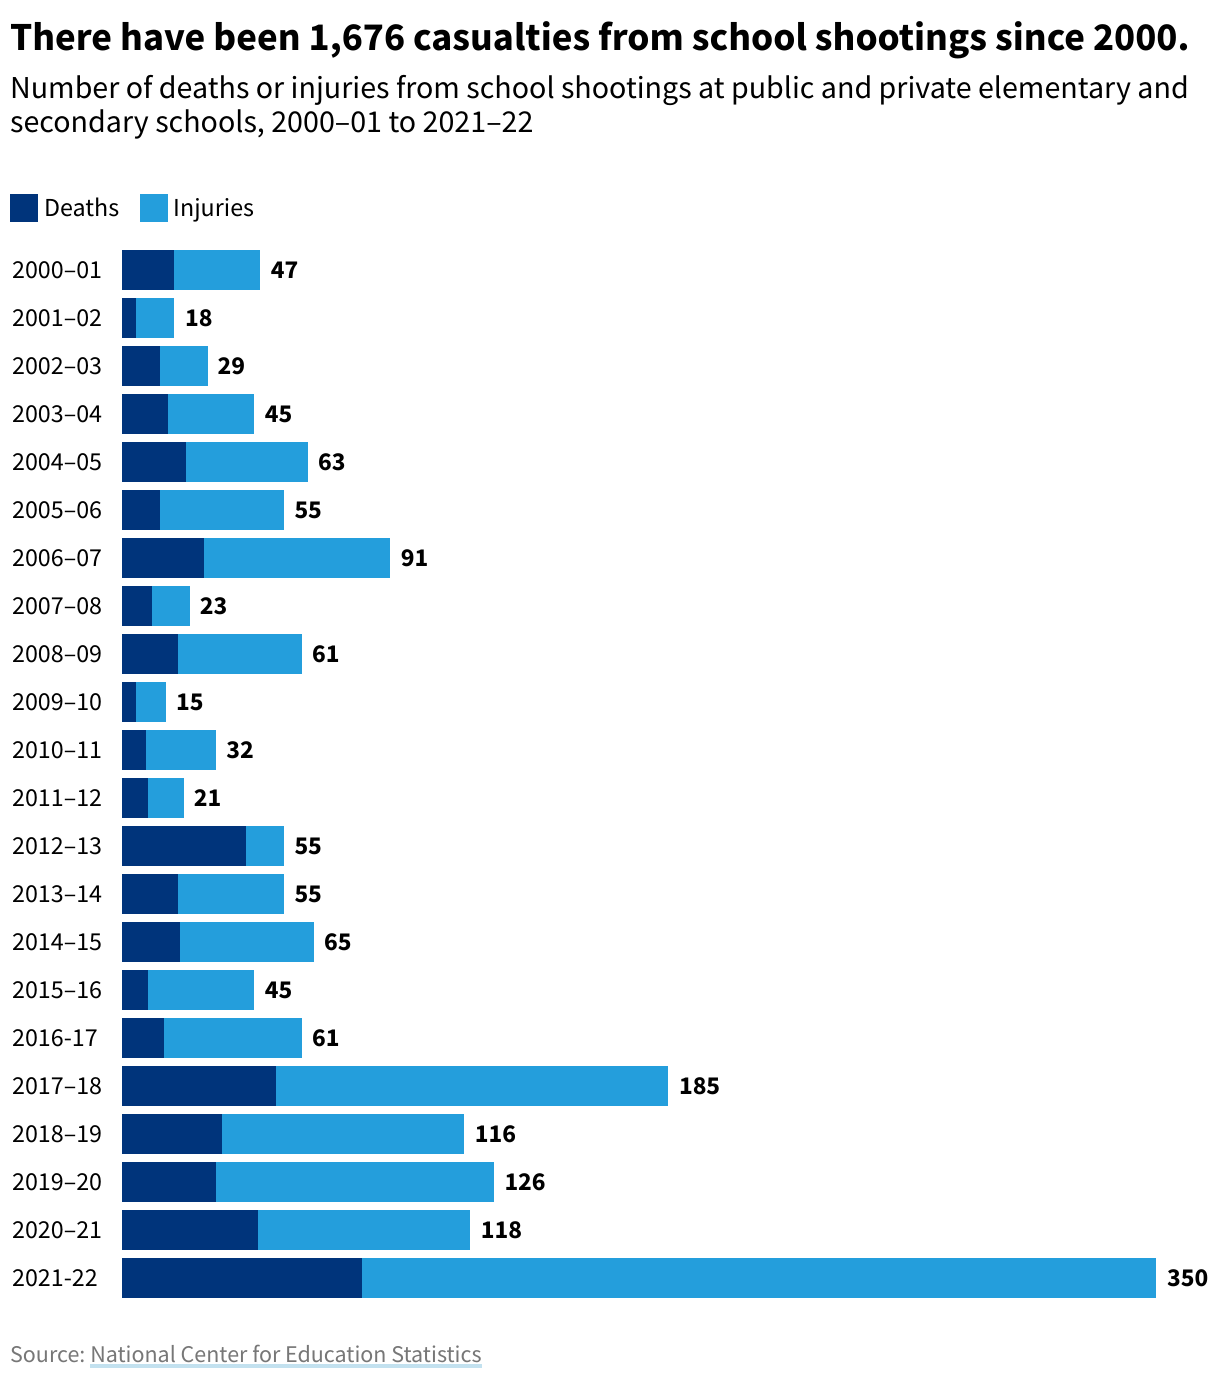 A column chart showing the number of deaths and injuries from school shootings between the 2000-01 to the 2021-22 school years.